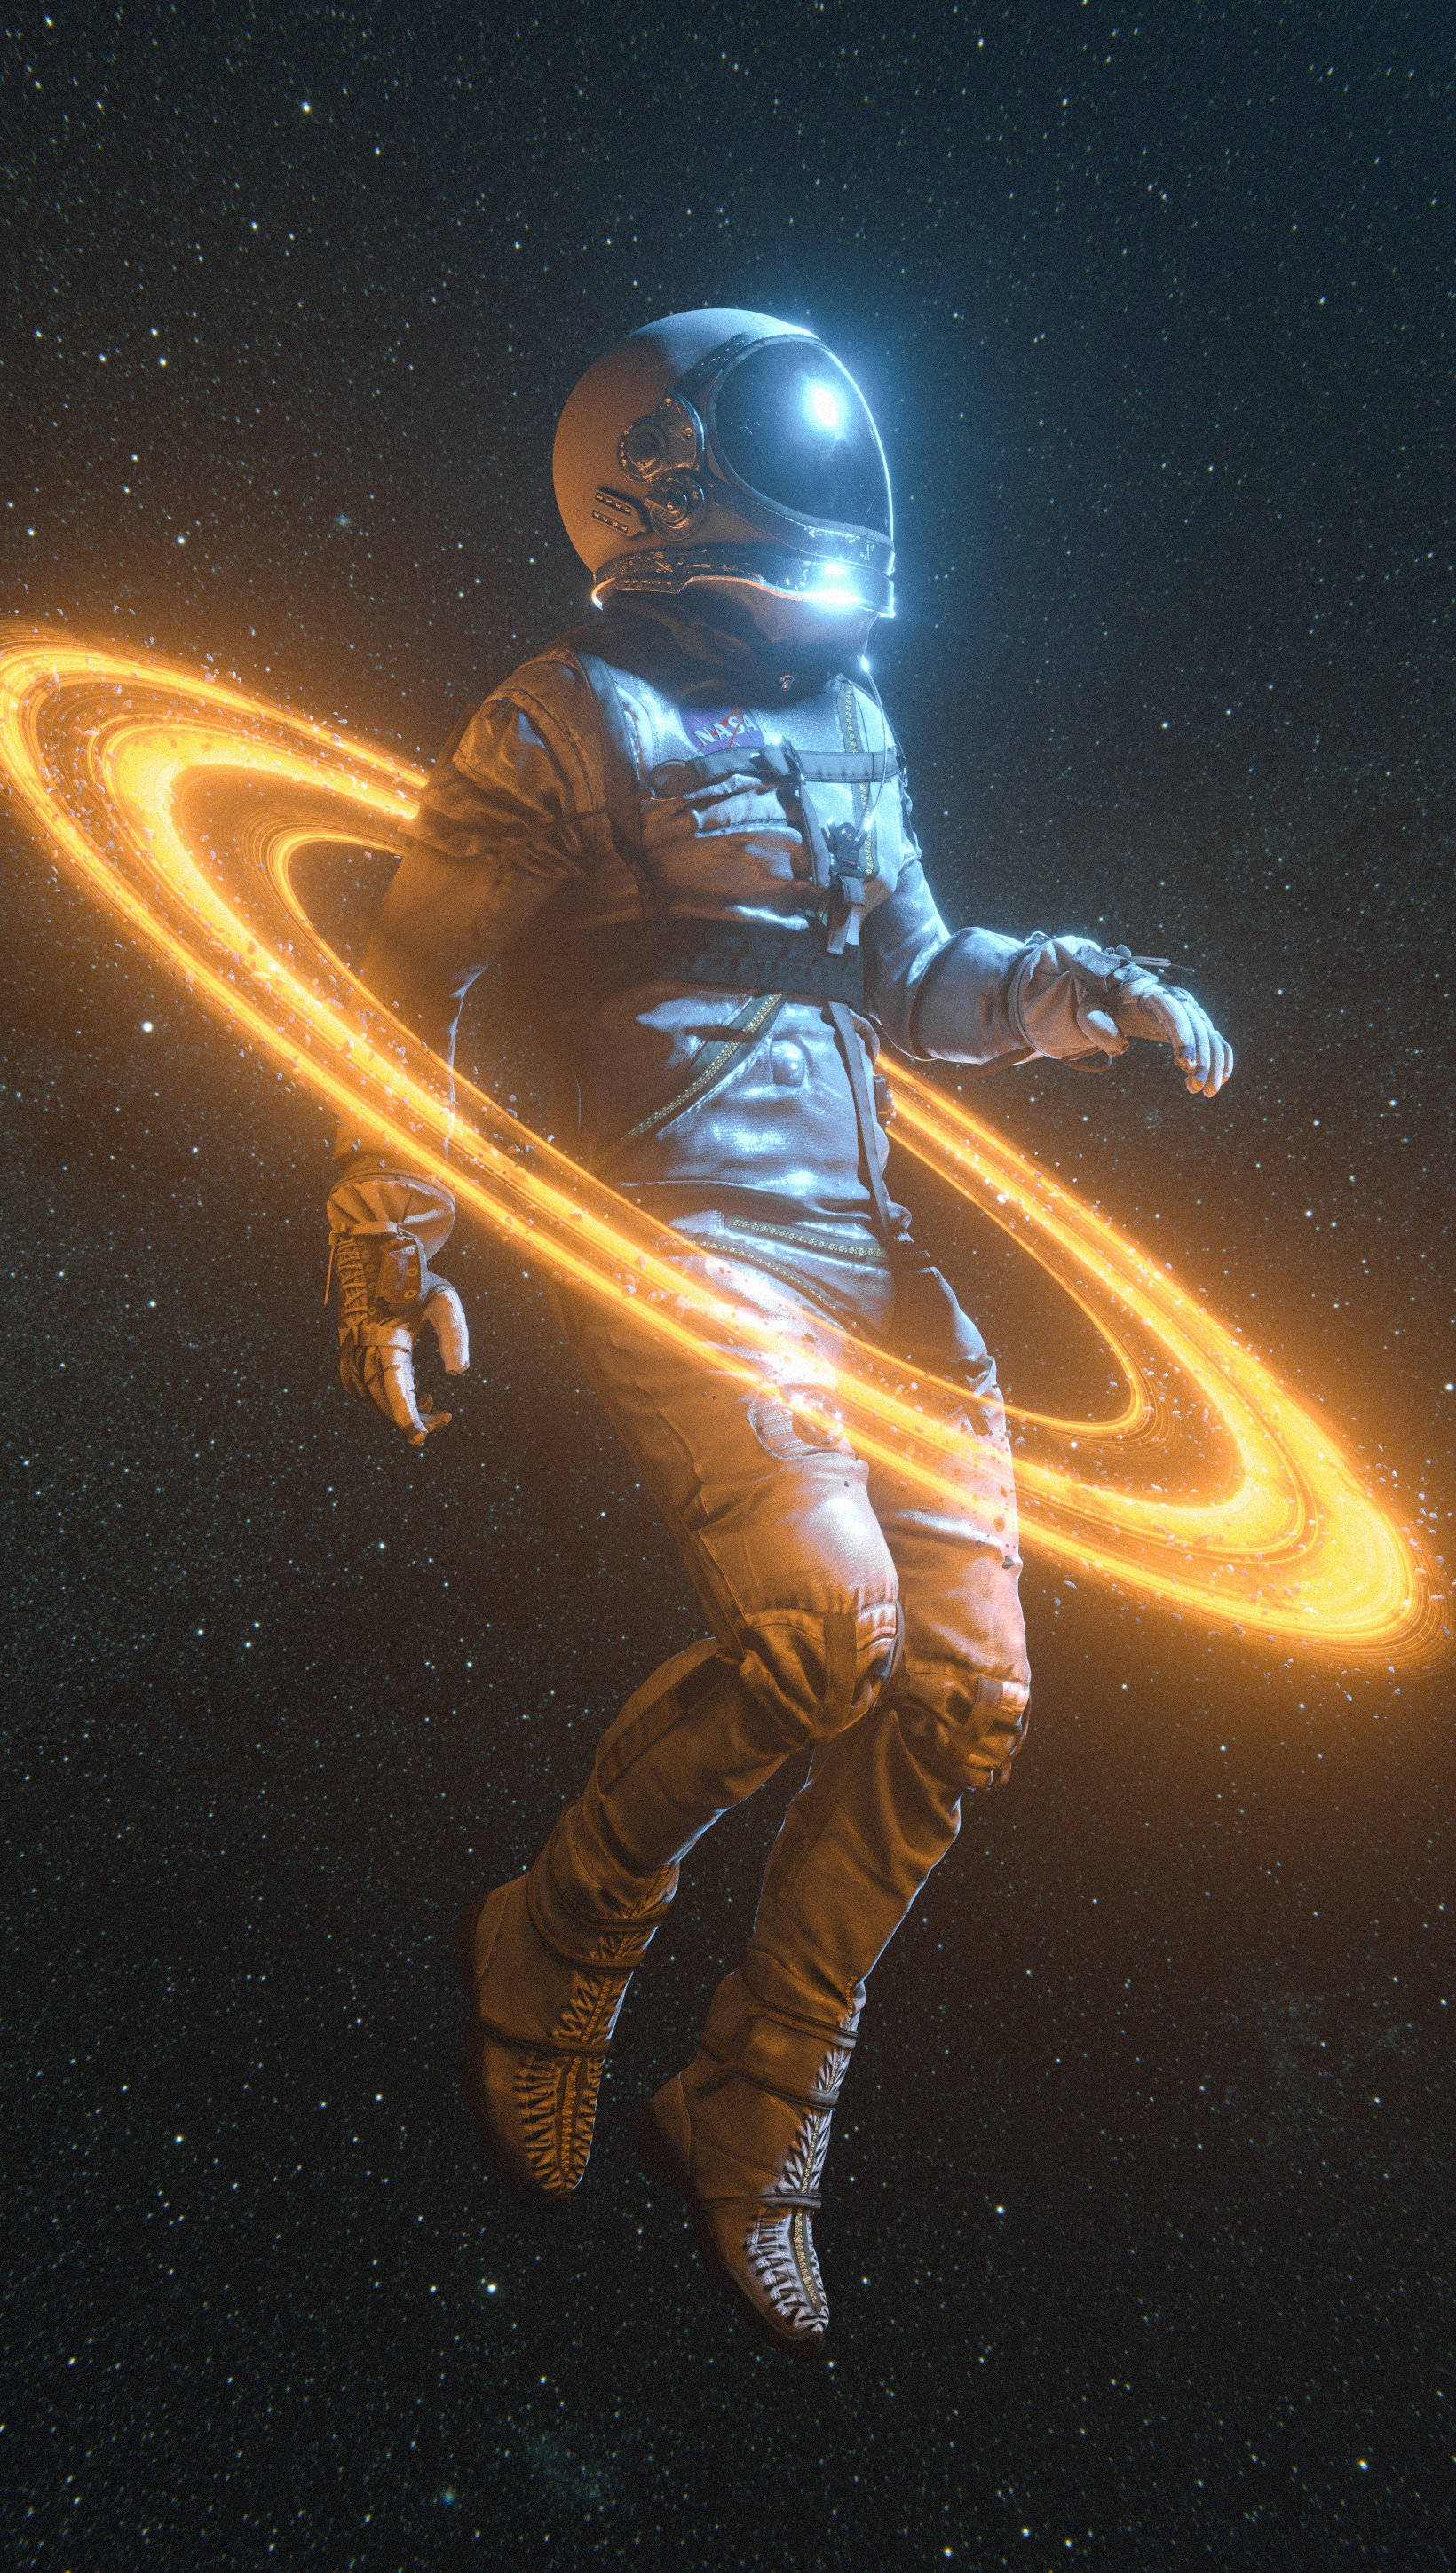 Download Astronaut With Planetary Rings Cool Android Wallpaper | Wallpapers .com